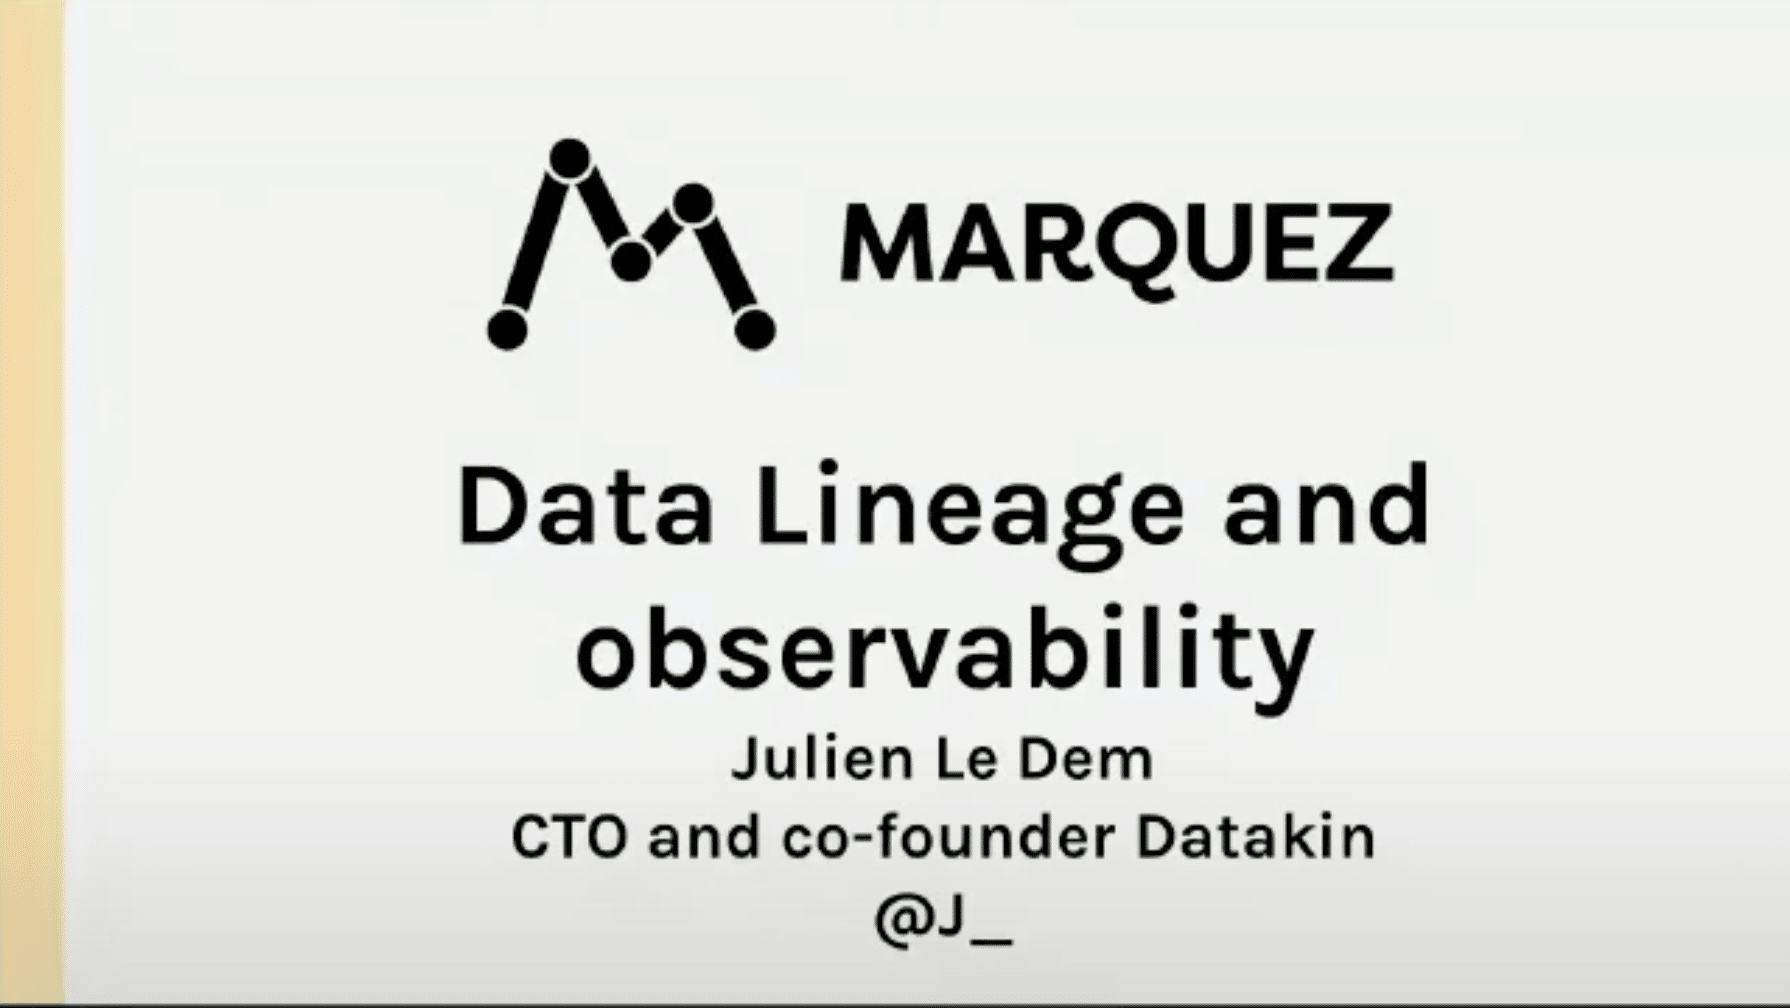 Data Lineage and Observability with Marquez